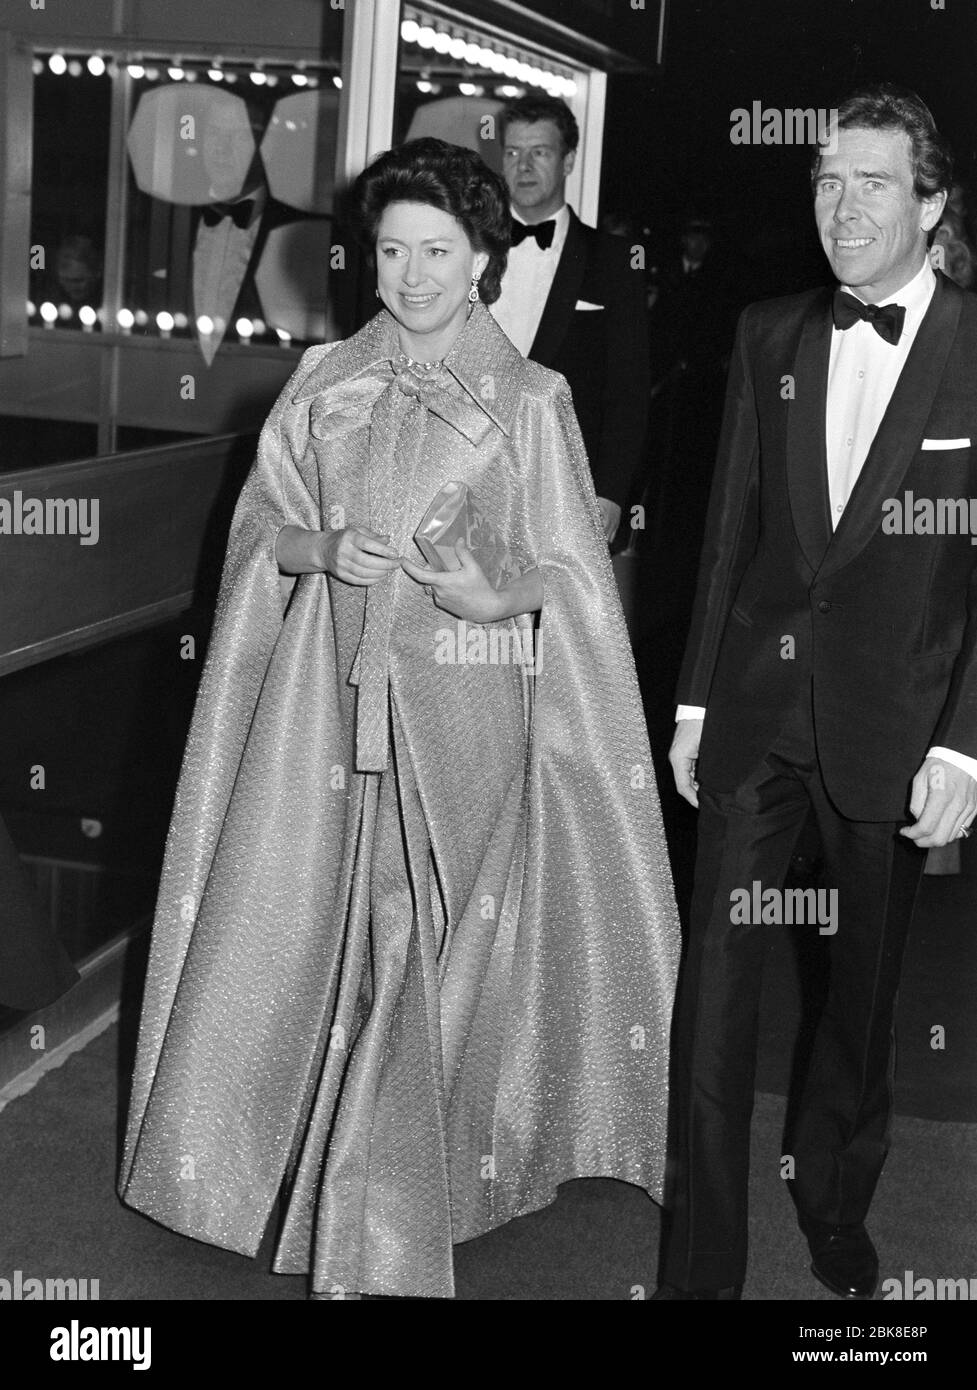 LONDON, UK. January, 1975: HRH Princess Margaret & husband Lord Snowdon attends the royal premiere of 'The Great McGonagall'.  File photo © Paul Smith/Featureflash Stock Photo